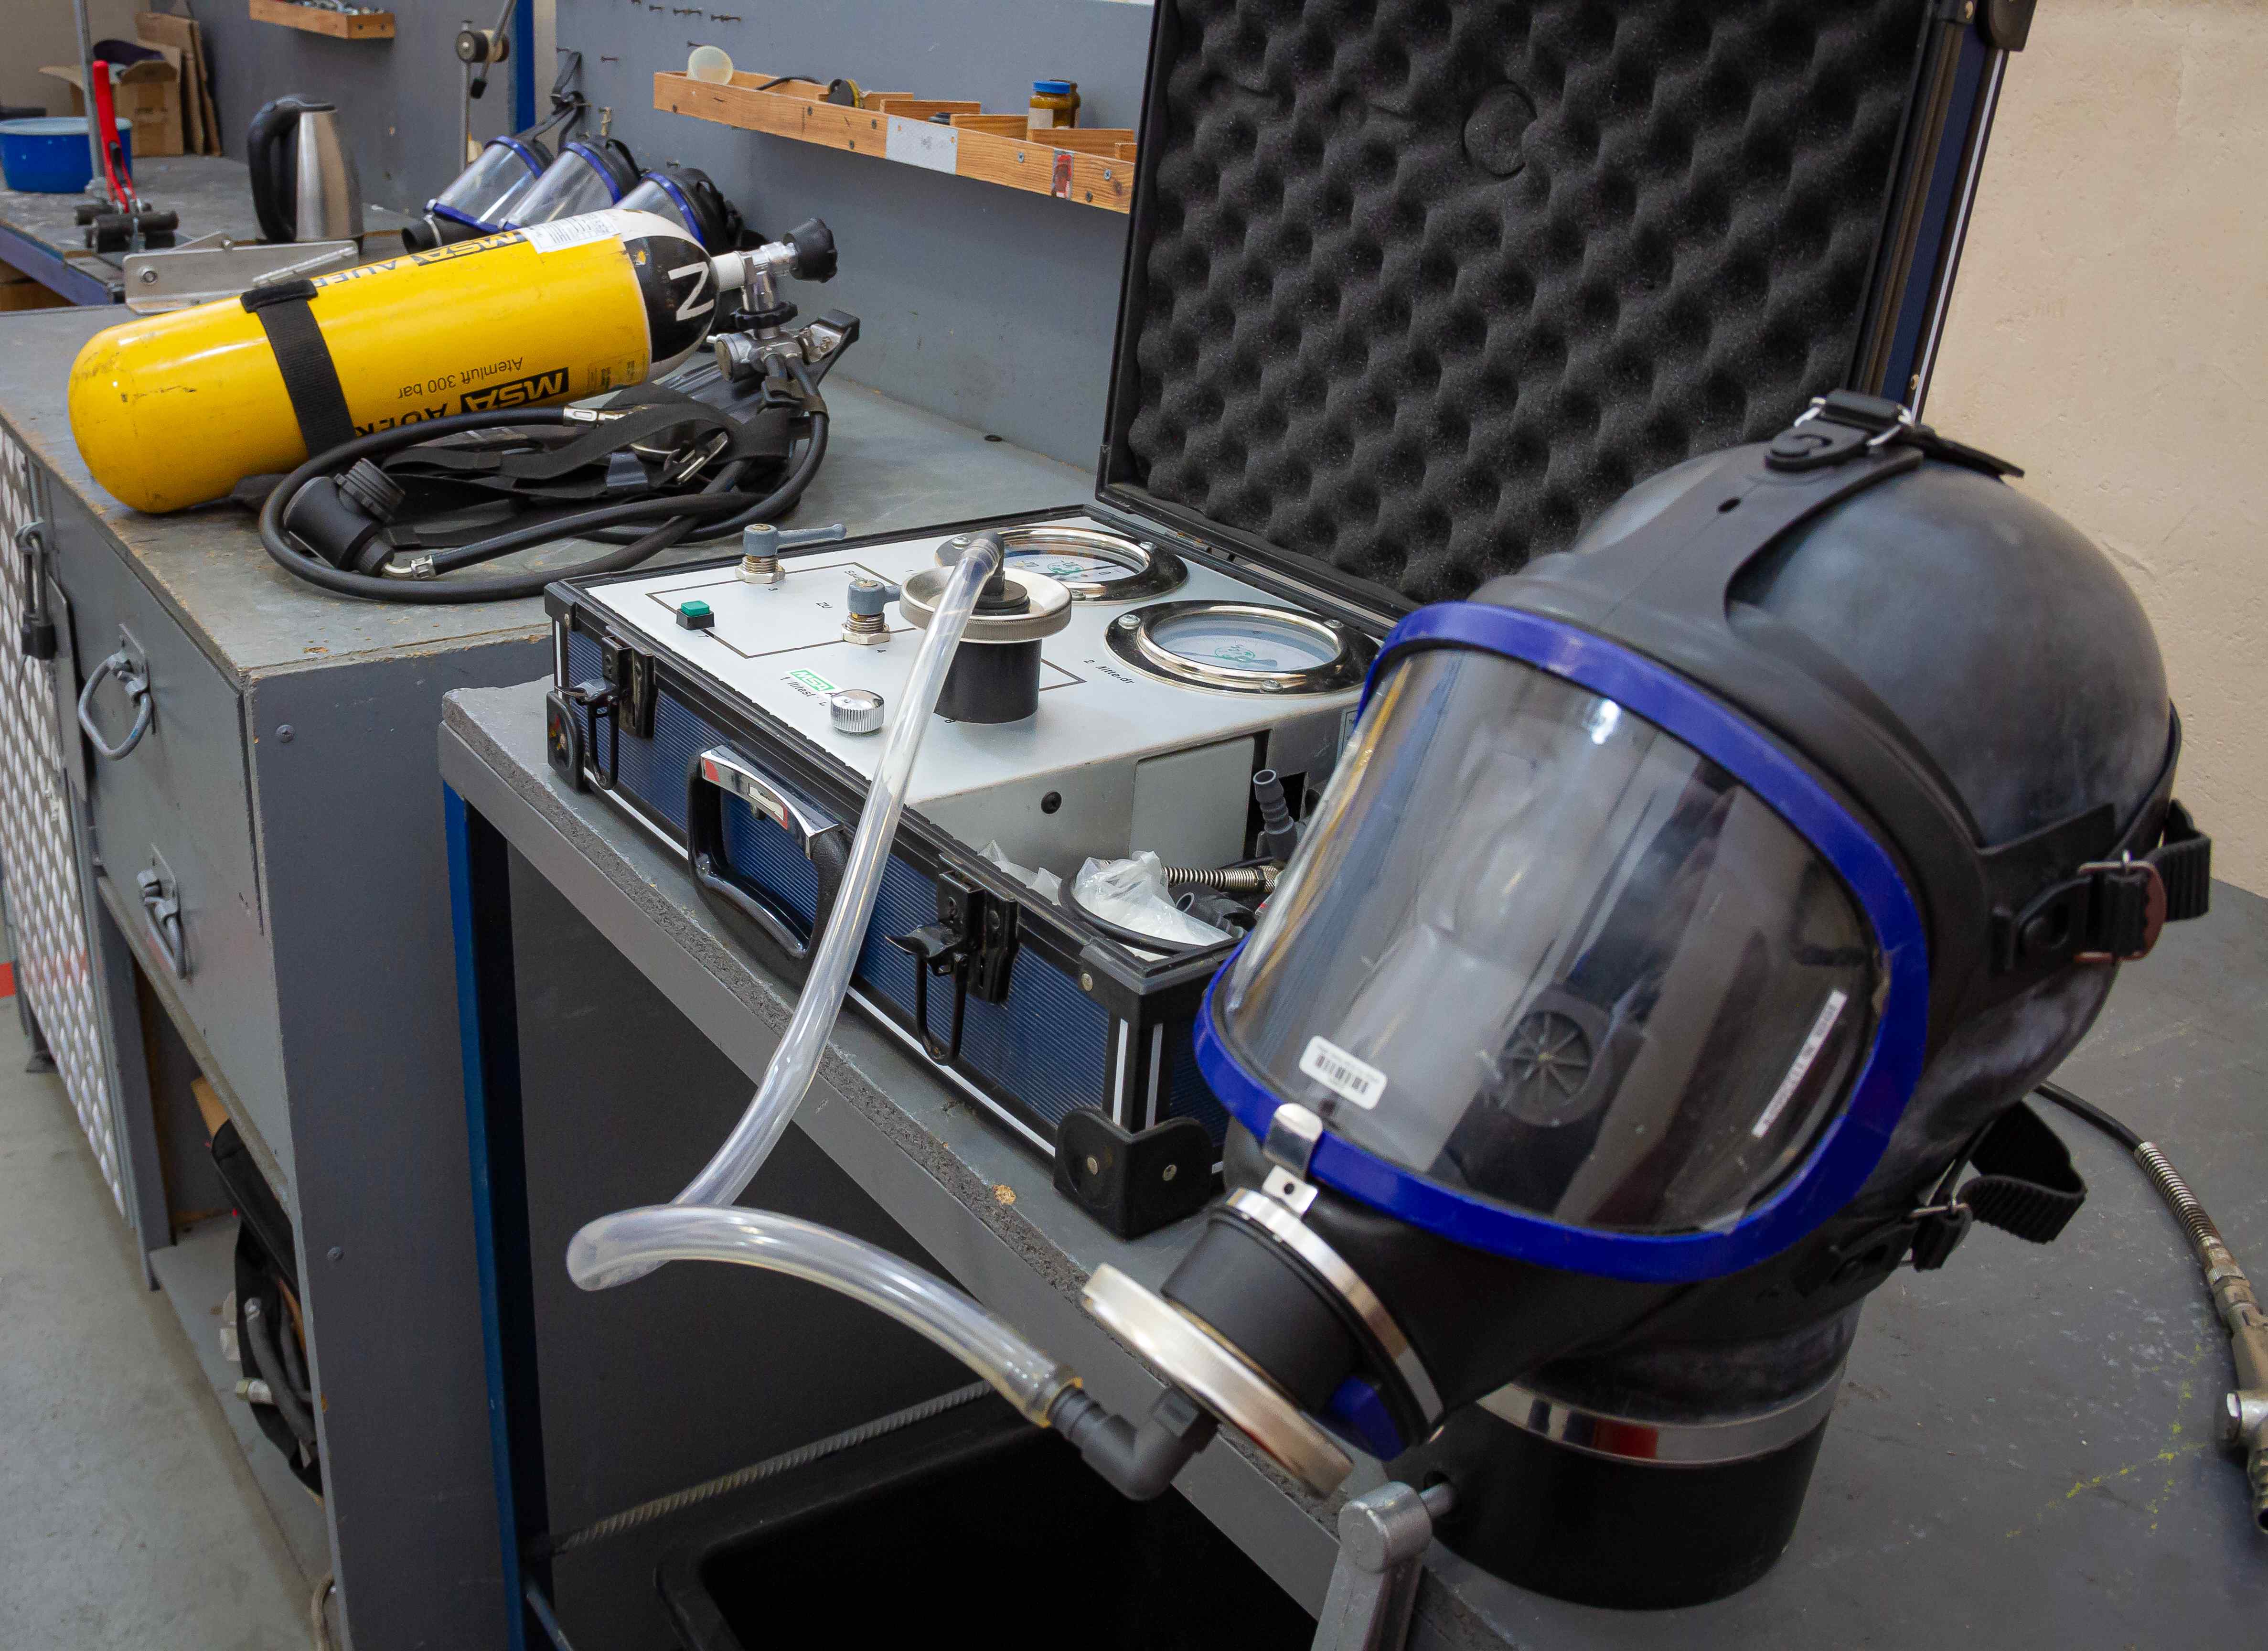 Examination and maintenance of a self-contained breathing apparatus  photo :: Marko Ltd